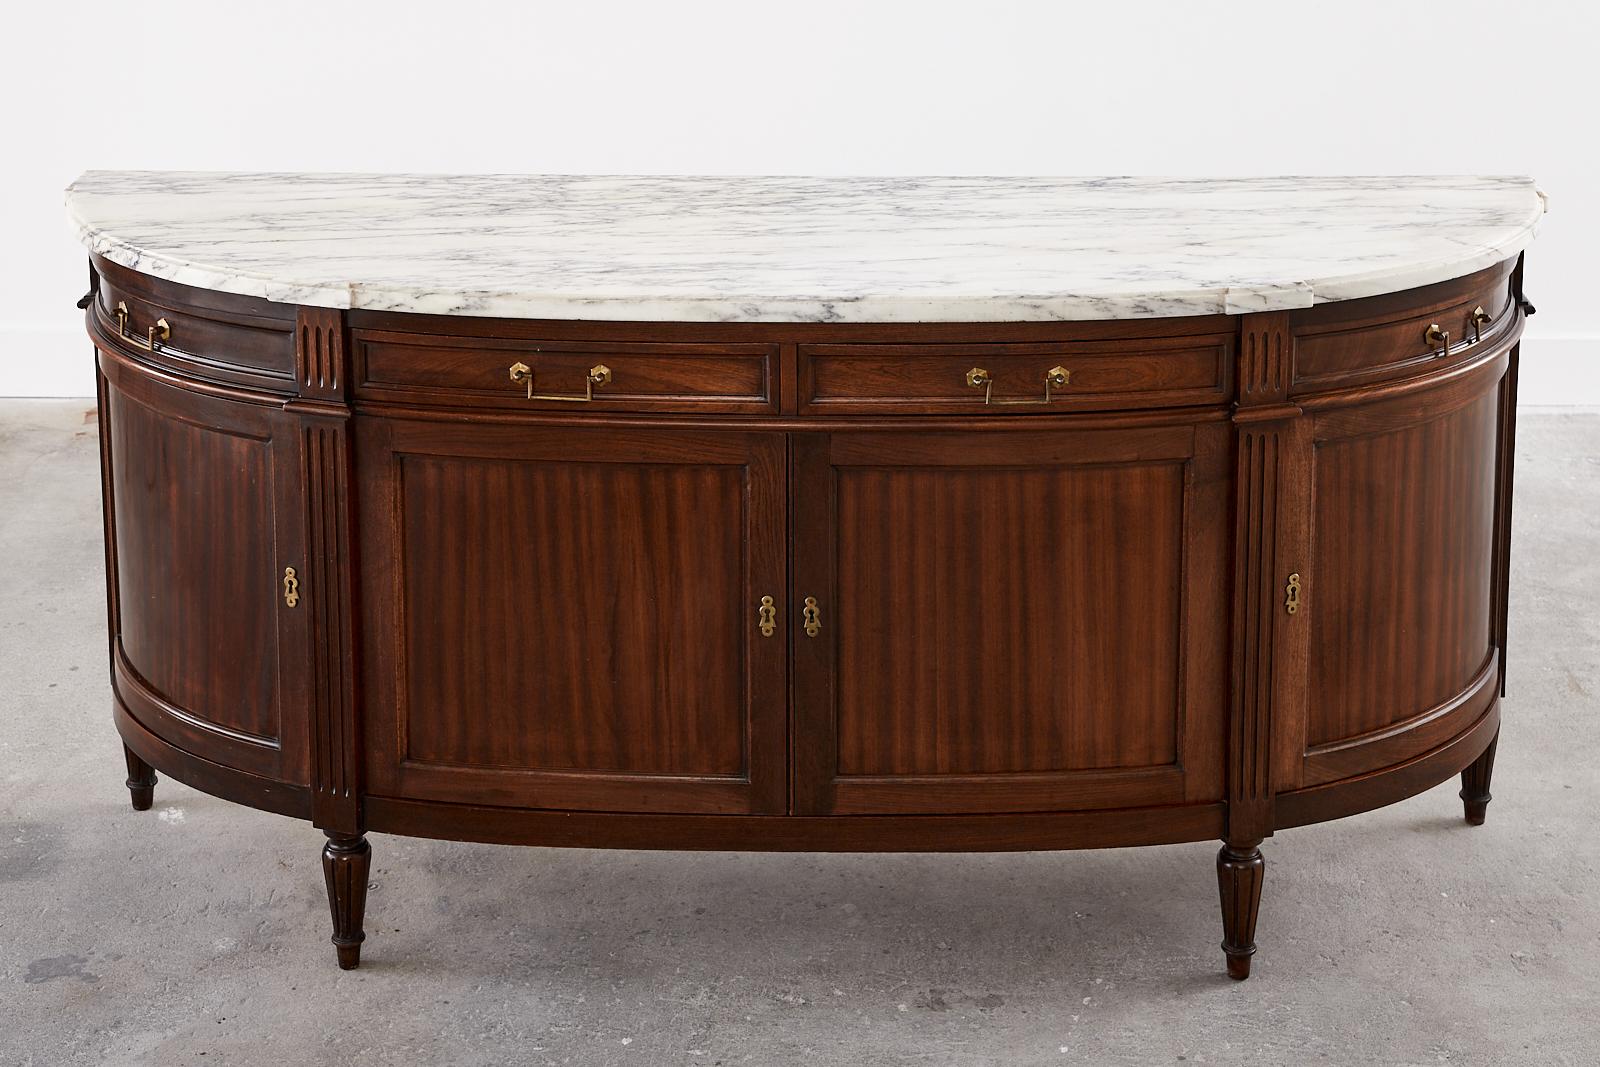 20th Century French Louis XVI Style Mahogany Marble Top Sideboard Buffet